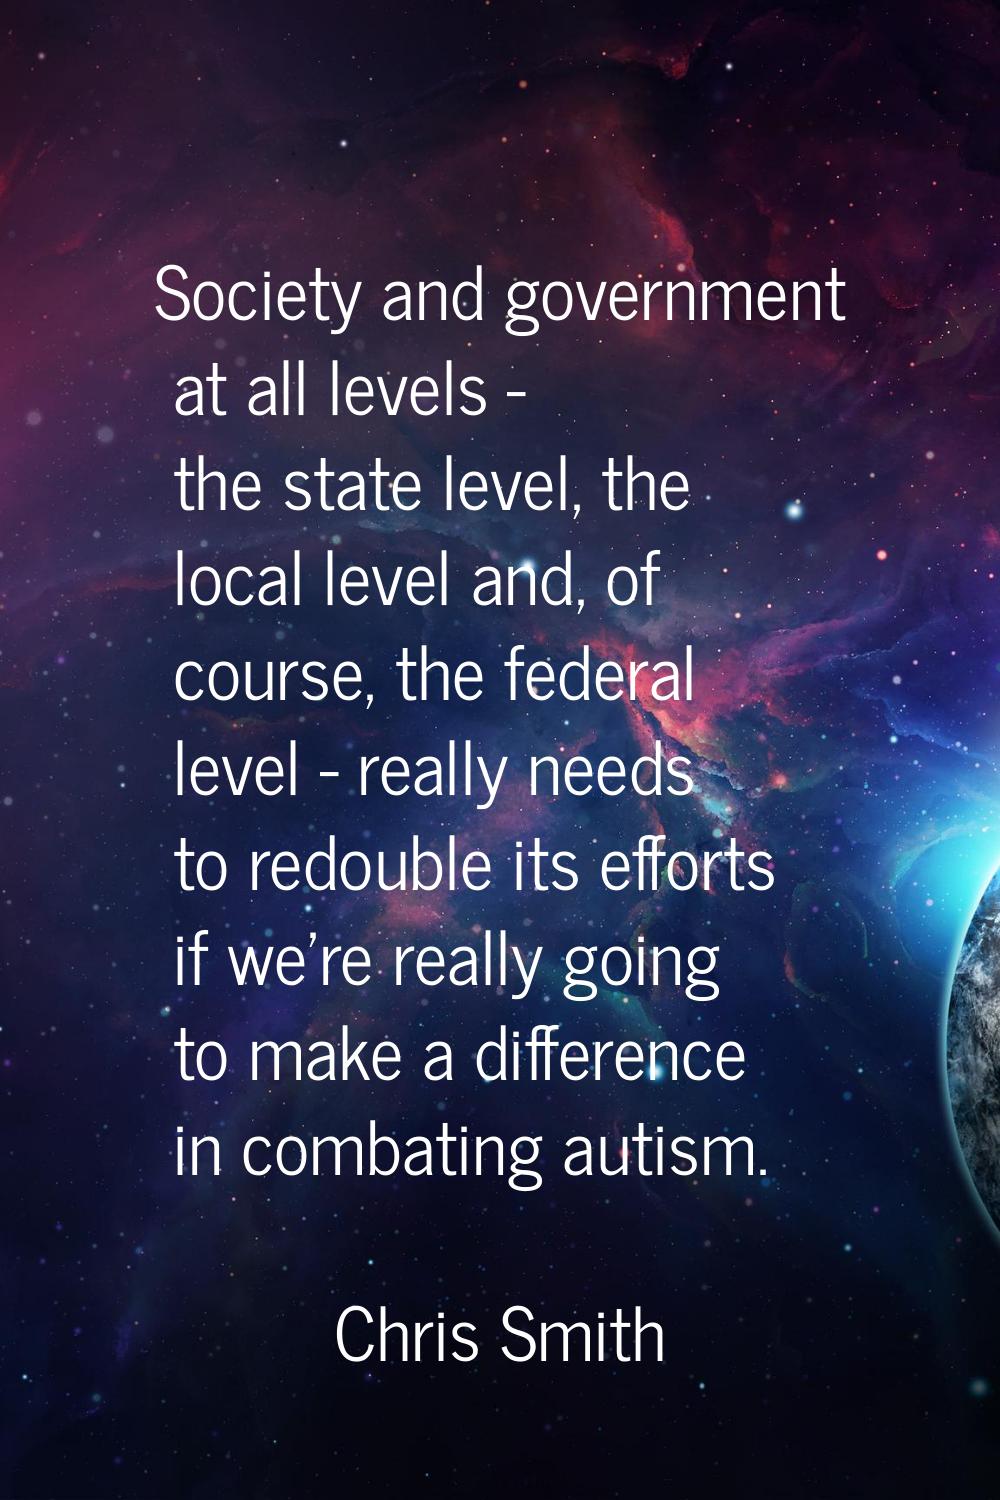 Society and government at all levels - the state level, the local level and, of course, the federal